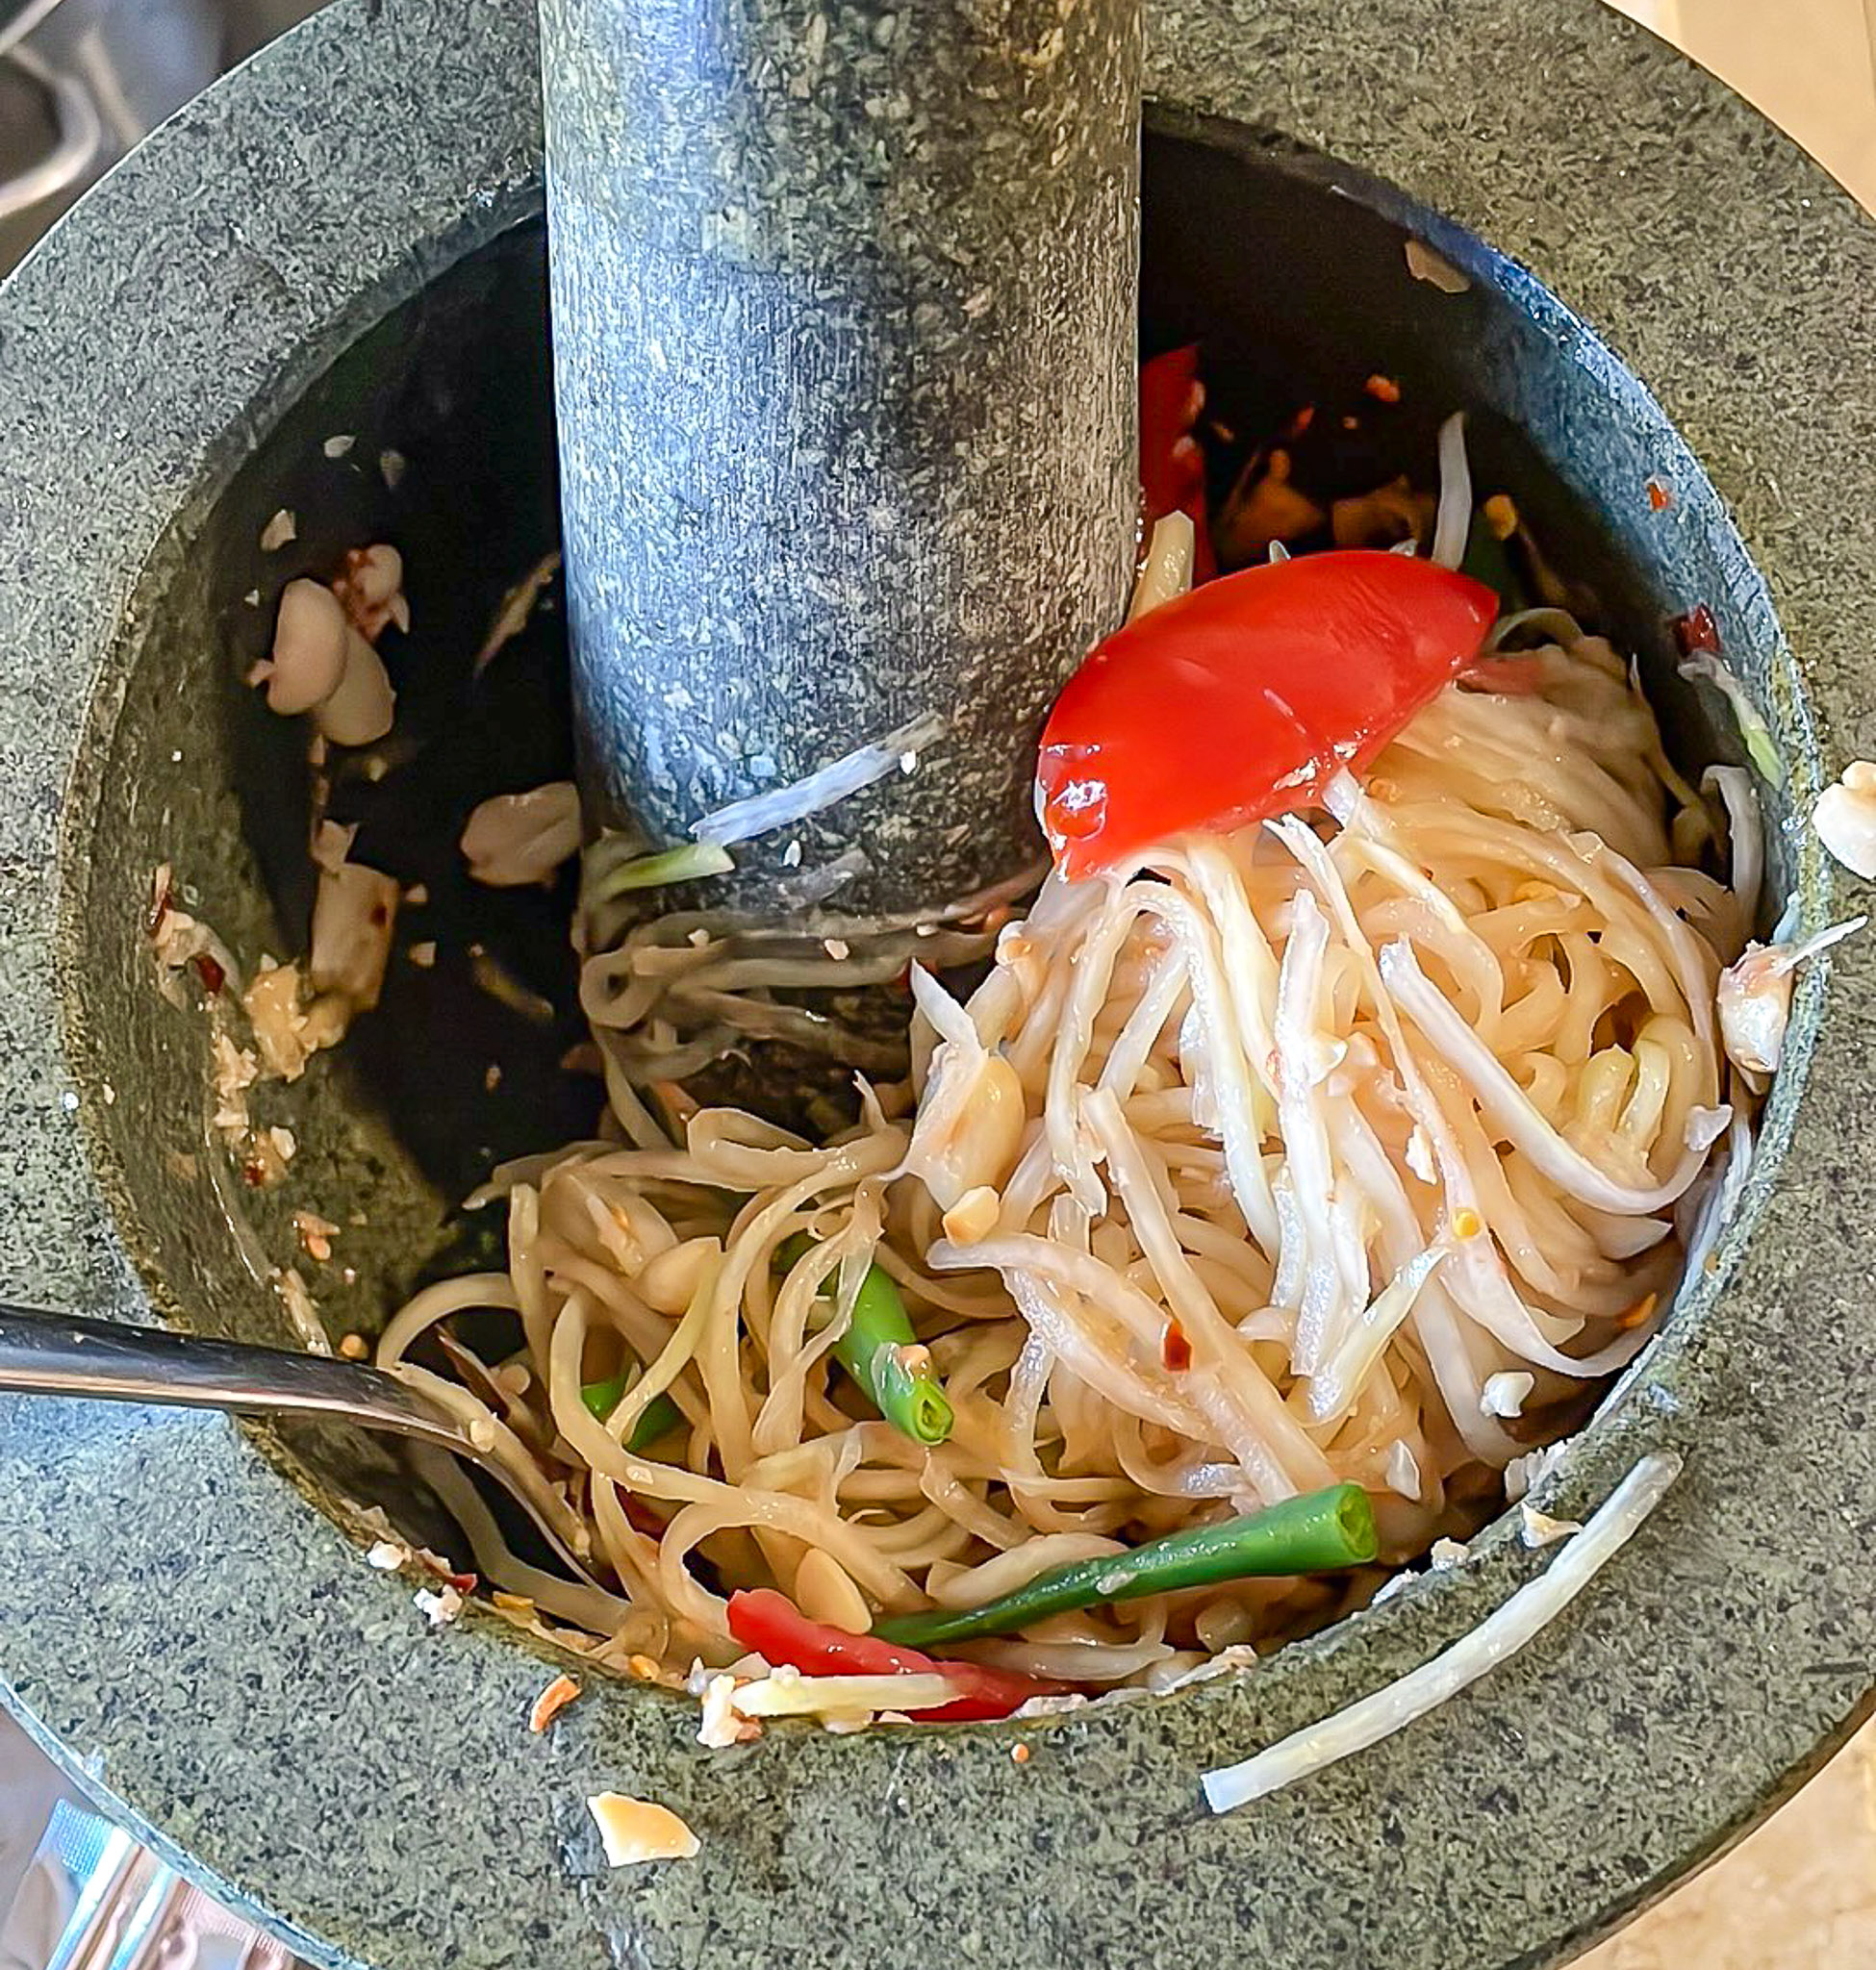 alt="green papaya salad in the process of being made using a mortar and pestle."